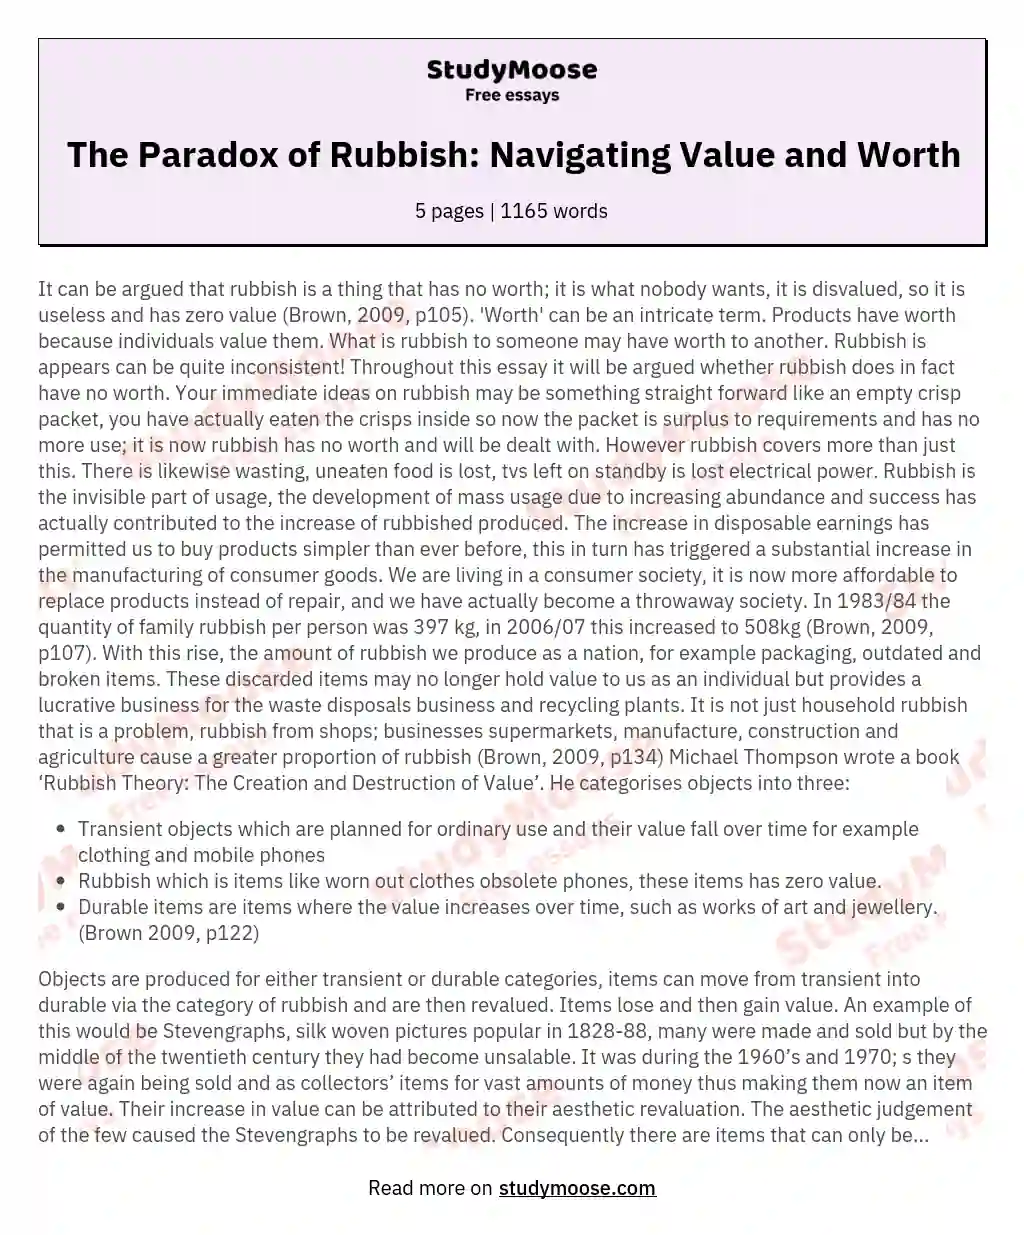 The Paradox of Rubbish: Navigating Value and Worth essay